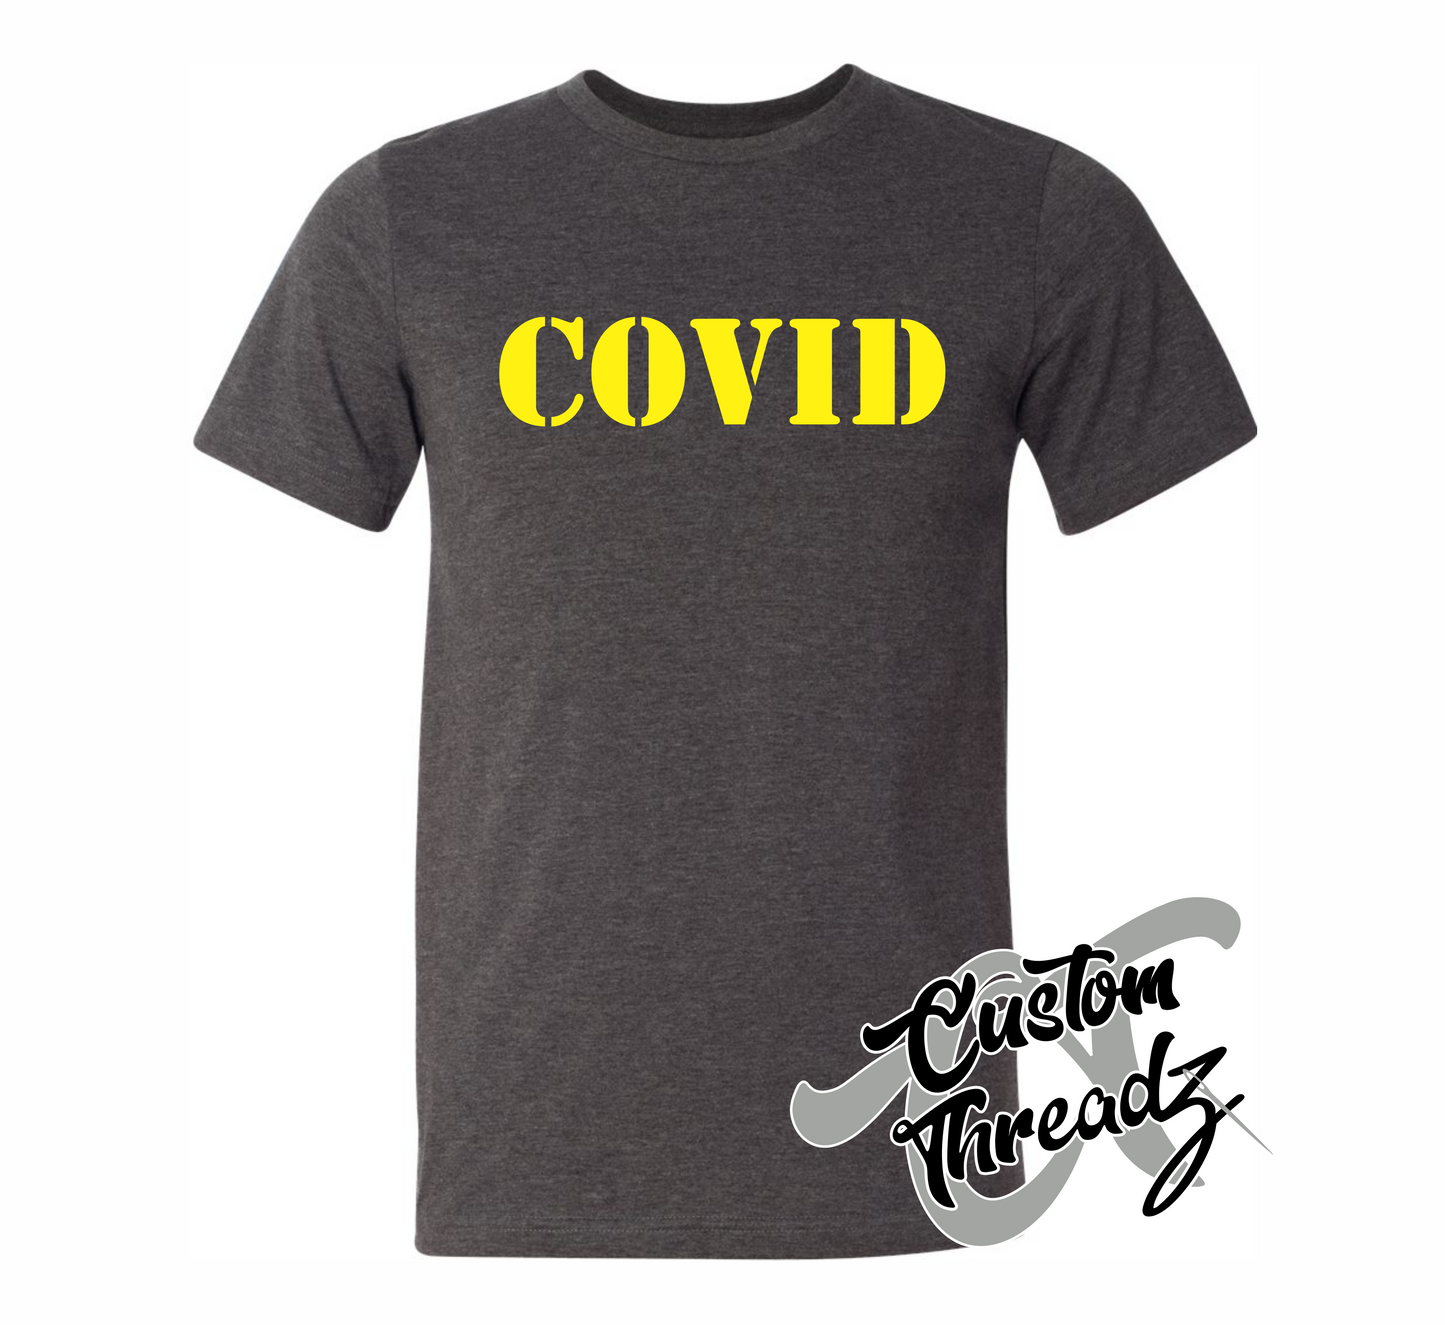 dark grey heather tee with covid DTG printed design